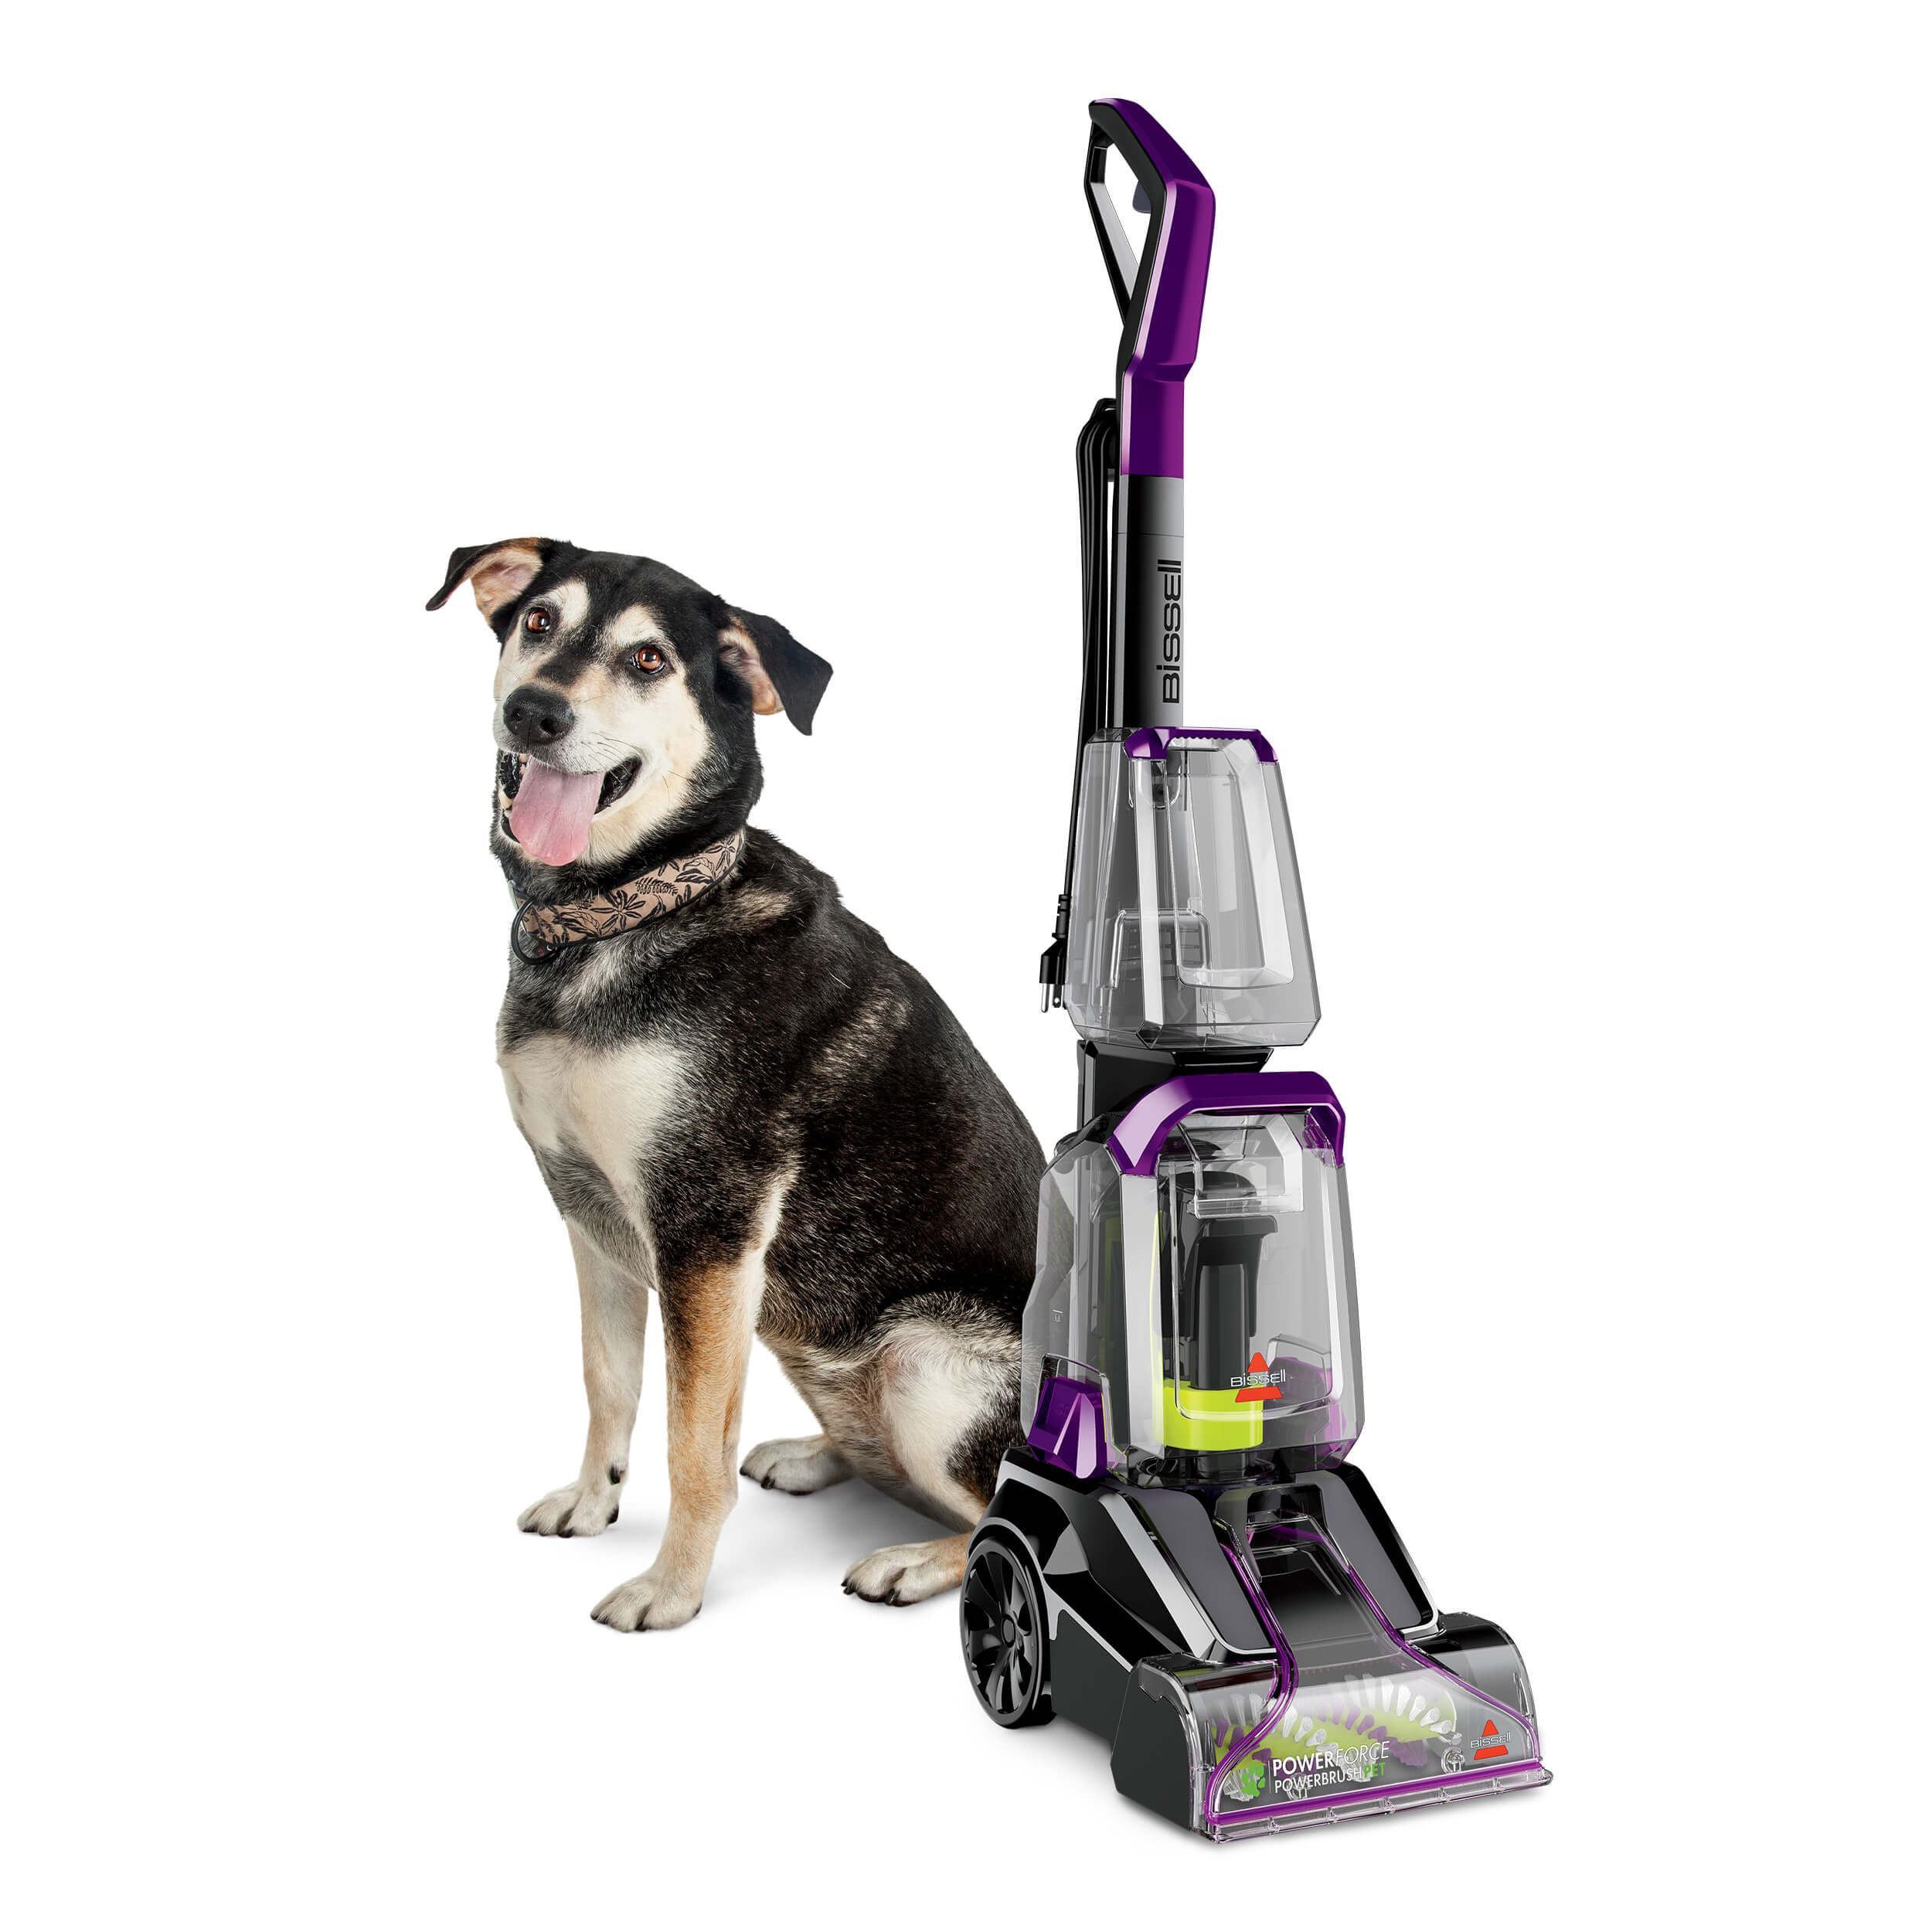 https://www.bissell.com/on/demandware.static/-/Sites-master-catalog-bissell/default/dwf218d740/hi-res/Product-Images/2910/_2910_PowerForce_PowerBrush_Pet_Advanced_A+_Content_Secondary_01.jpg